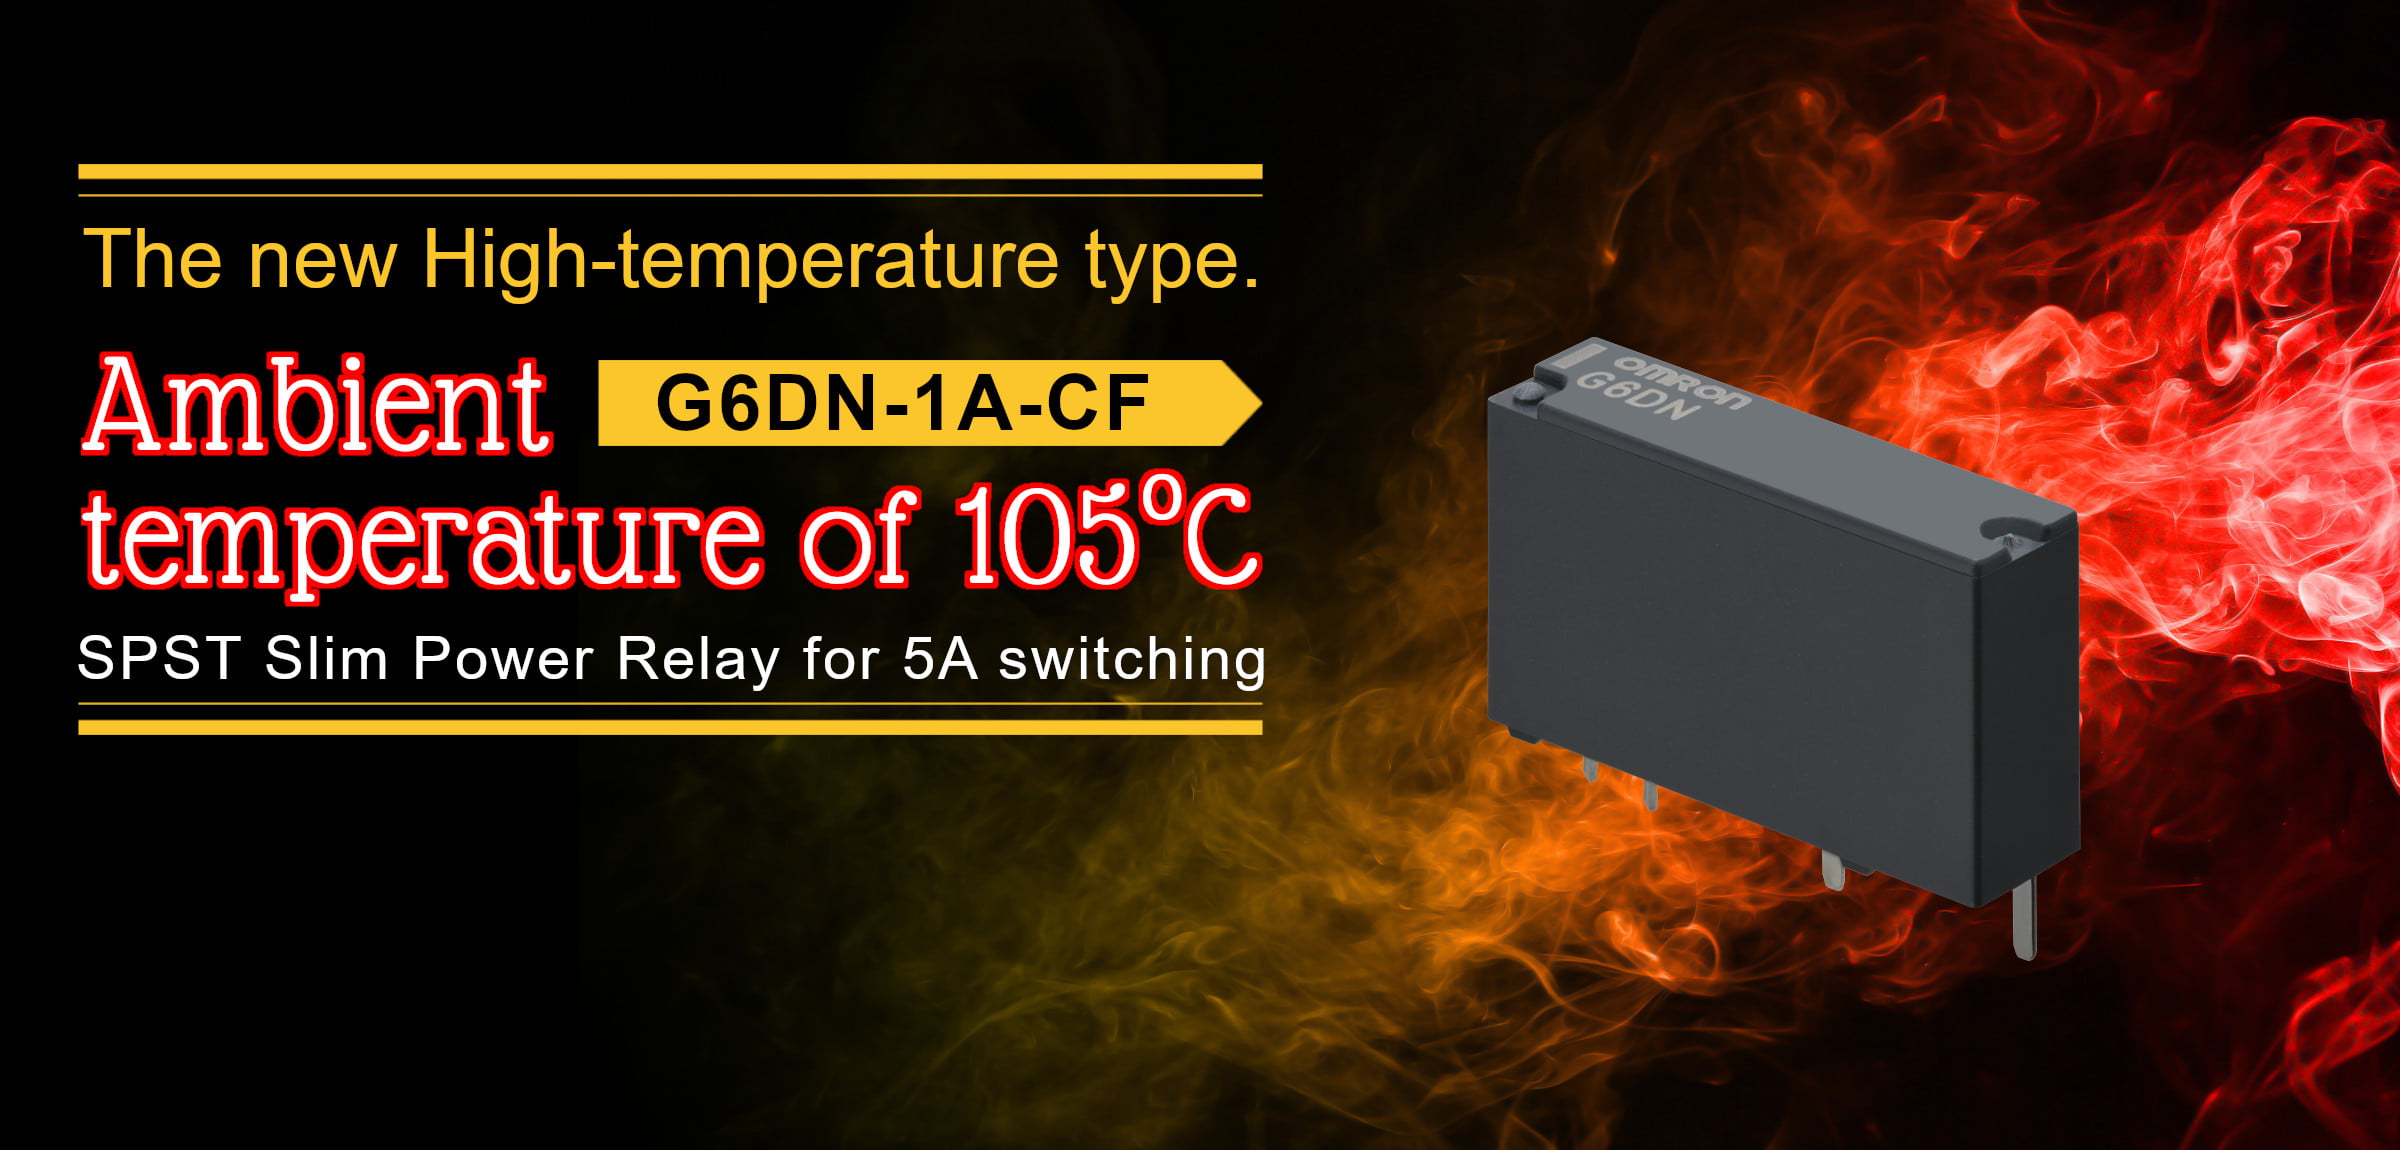 The new High-temperature type. Ambient temperature of 105℃ G6DN-1A-CF SPST Slim Power Relay for 5A switching